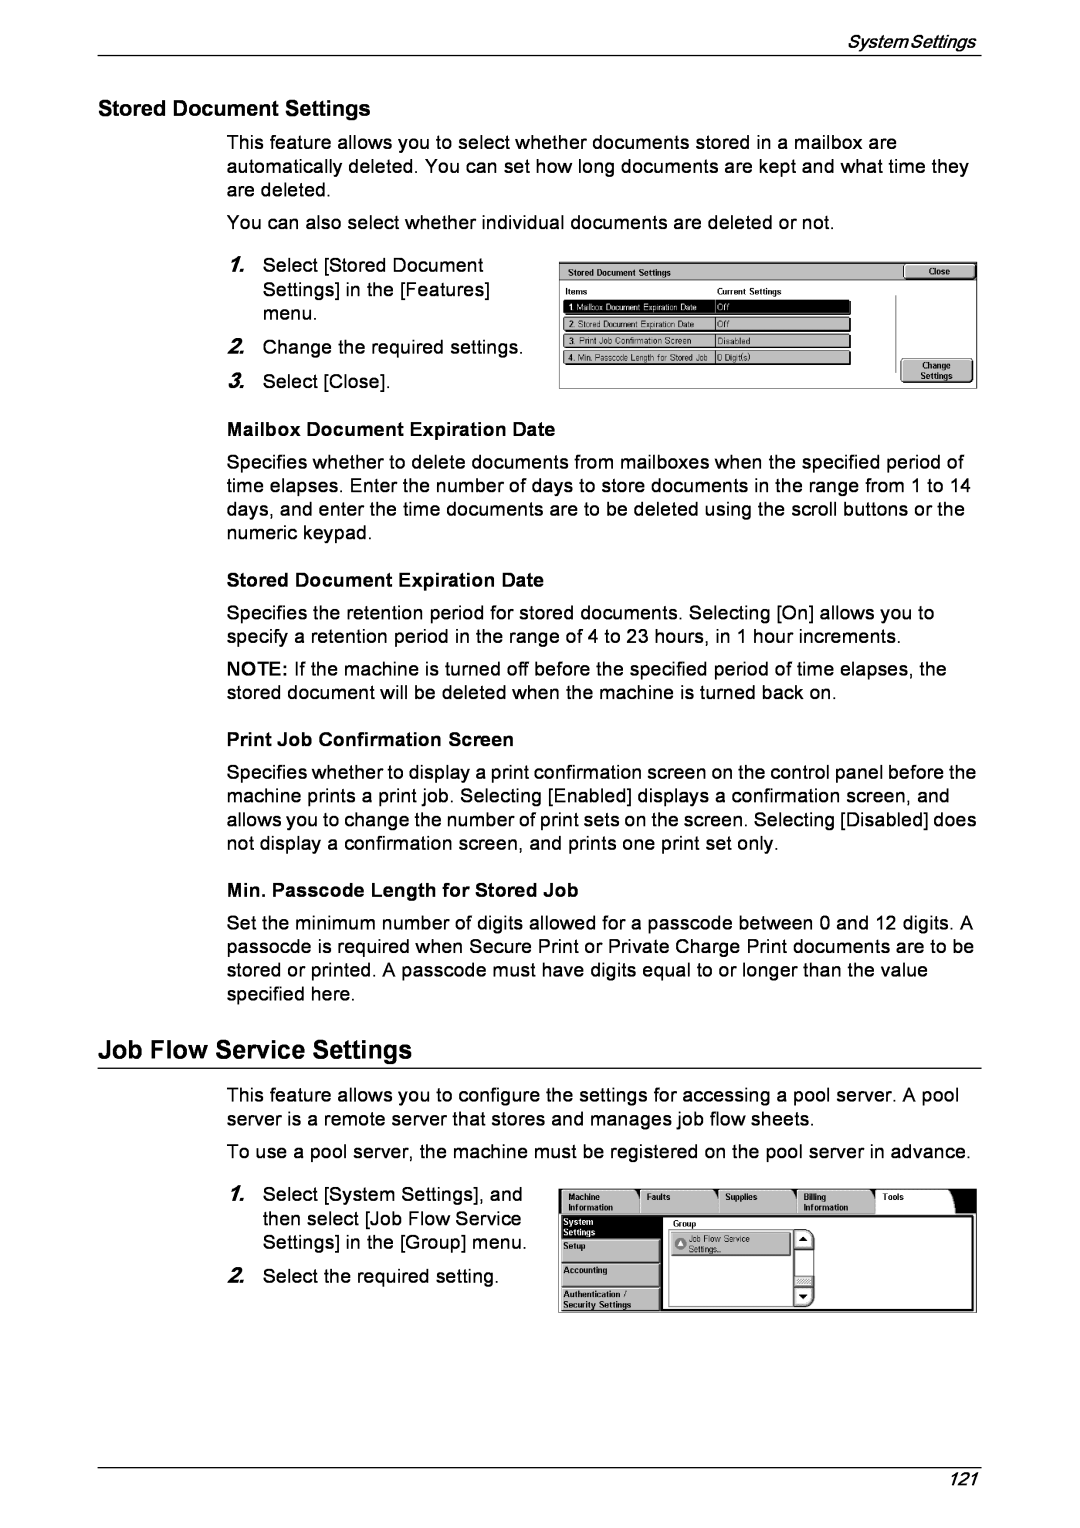 Xerox 5222 manual Job Flow Service Settings, Mailbox Document Expiration Date, Stored Document Expiration Date 